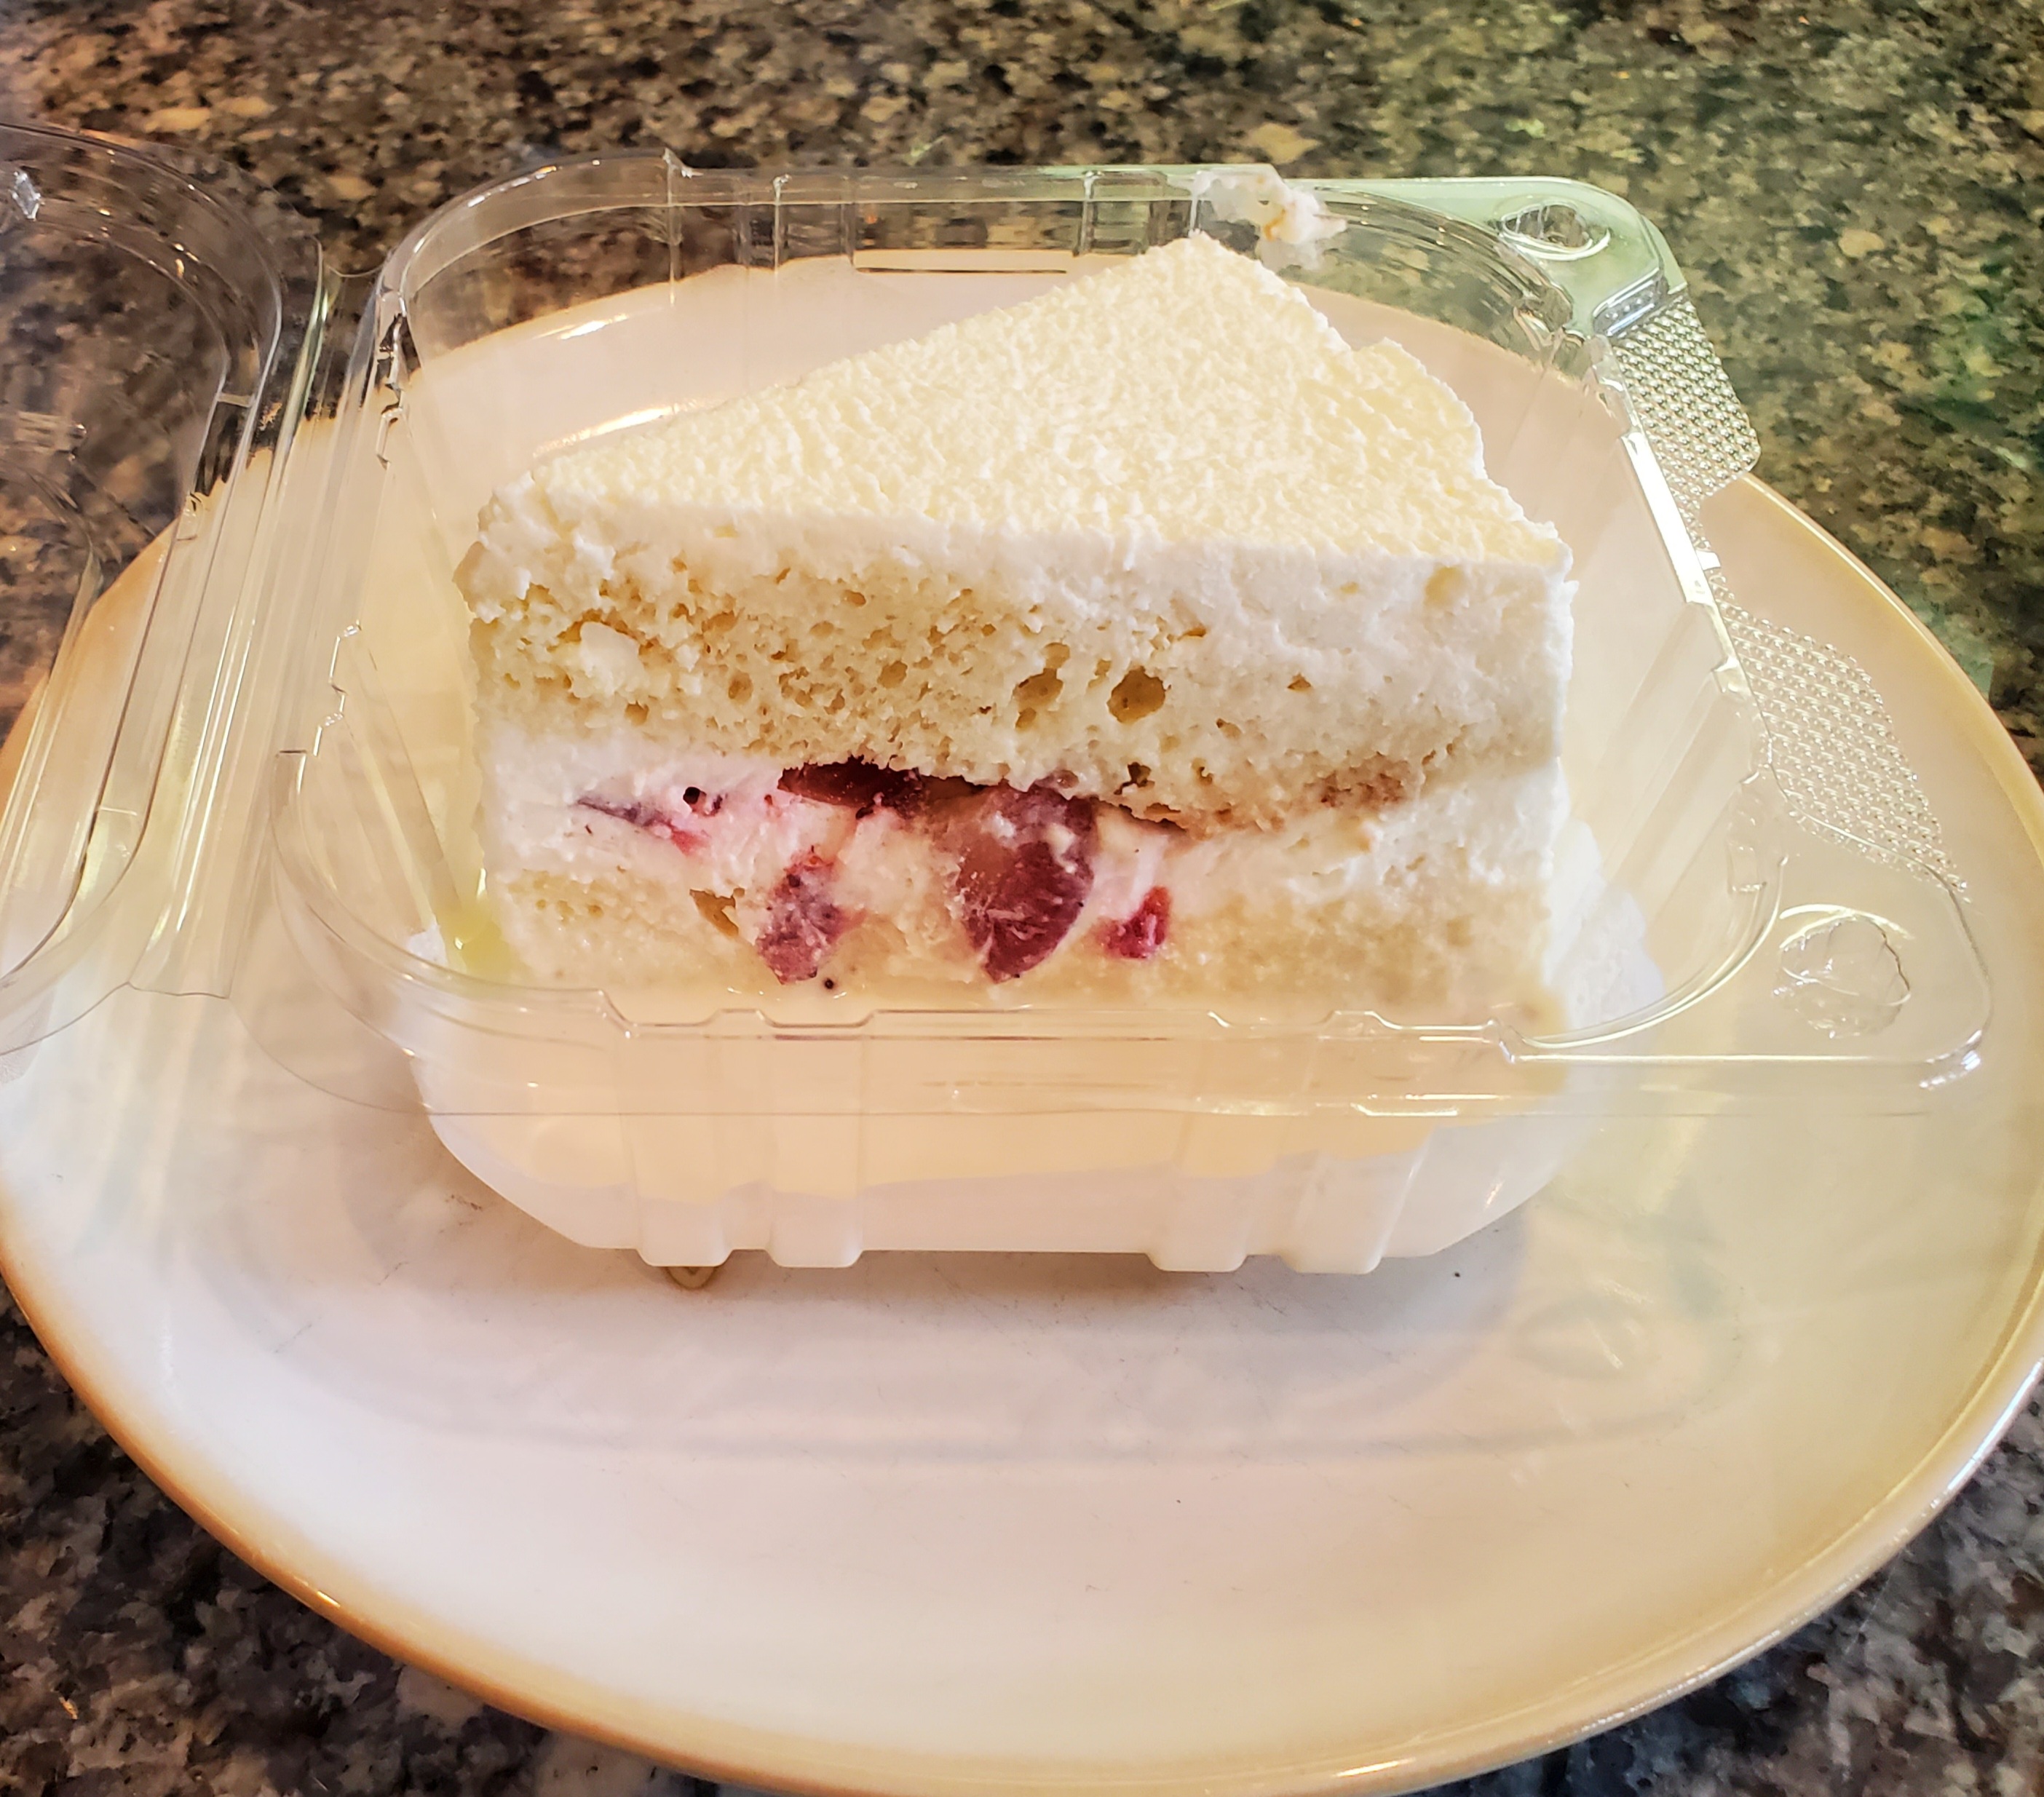 On a white plate, there is a tres leches cake in a plastic clamshell container. Photo by Carl Busch.